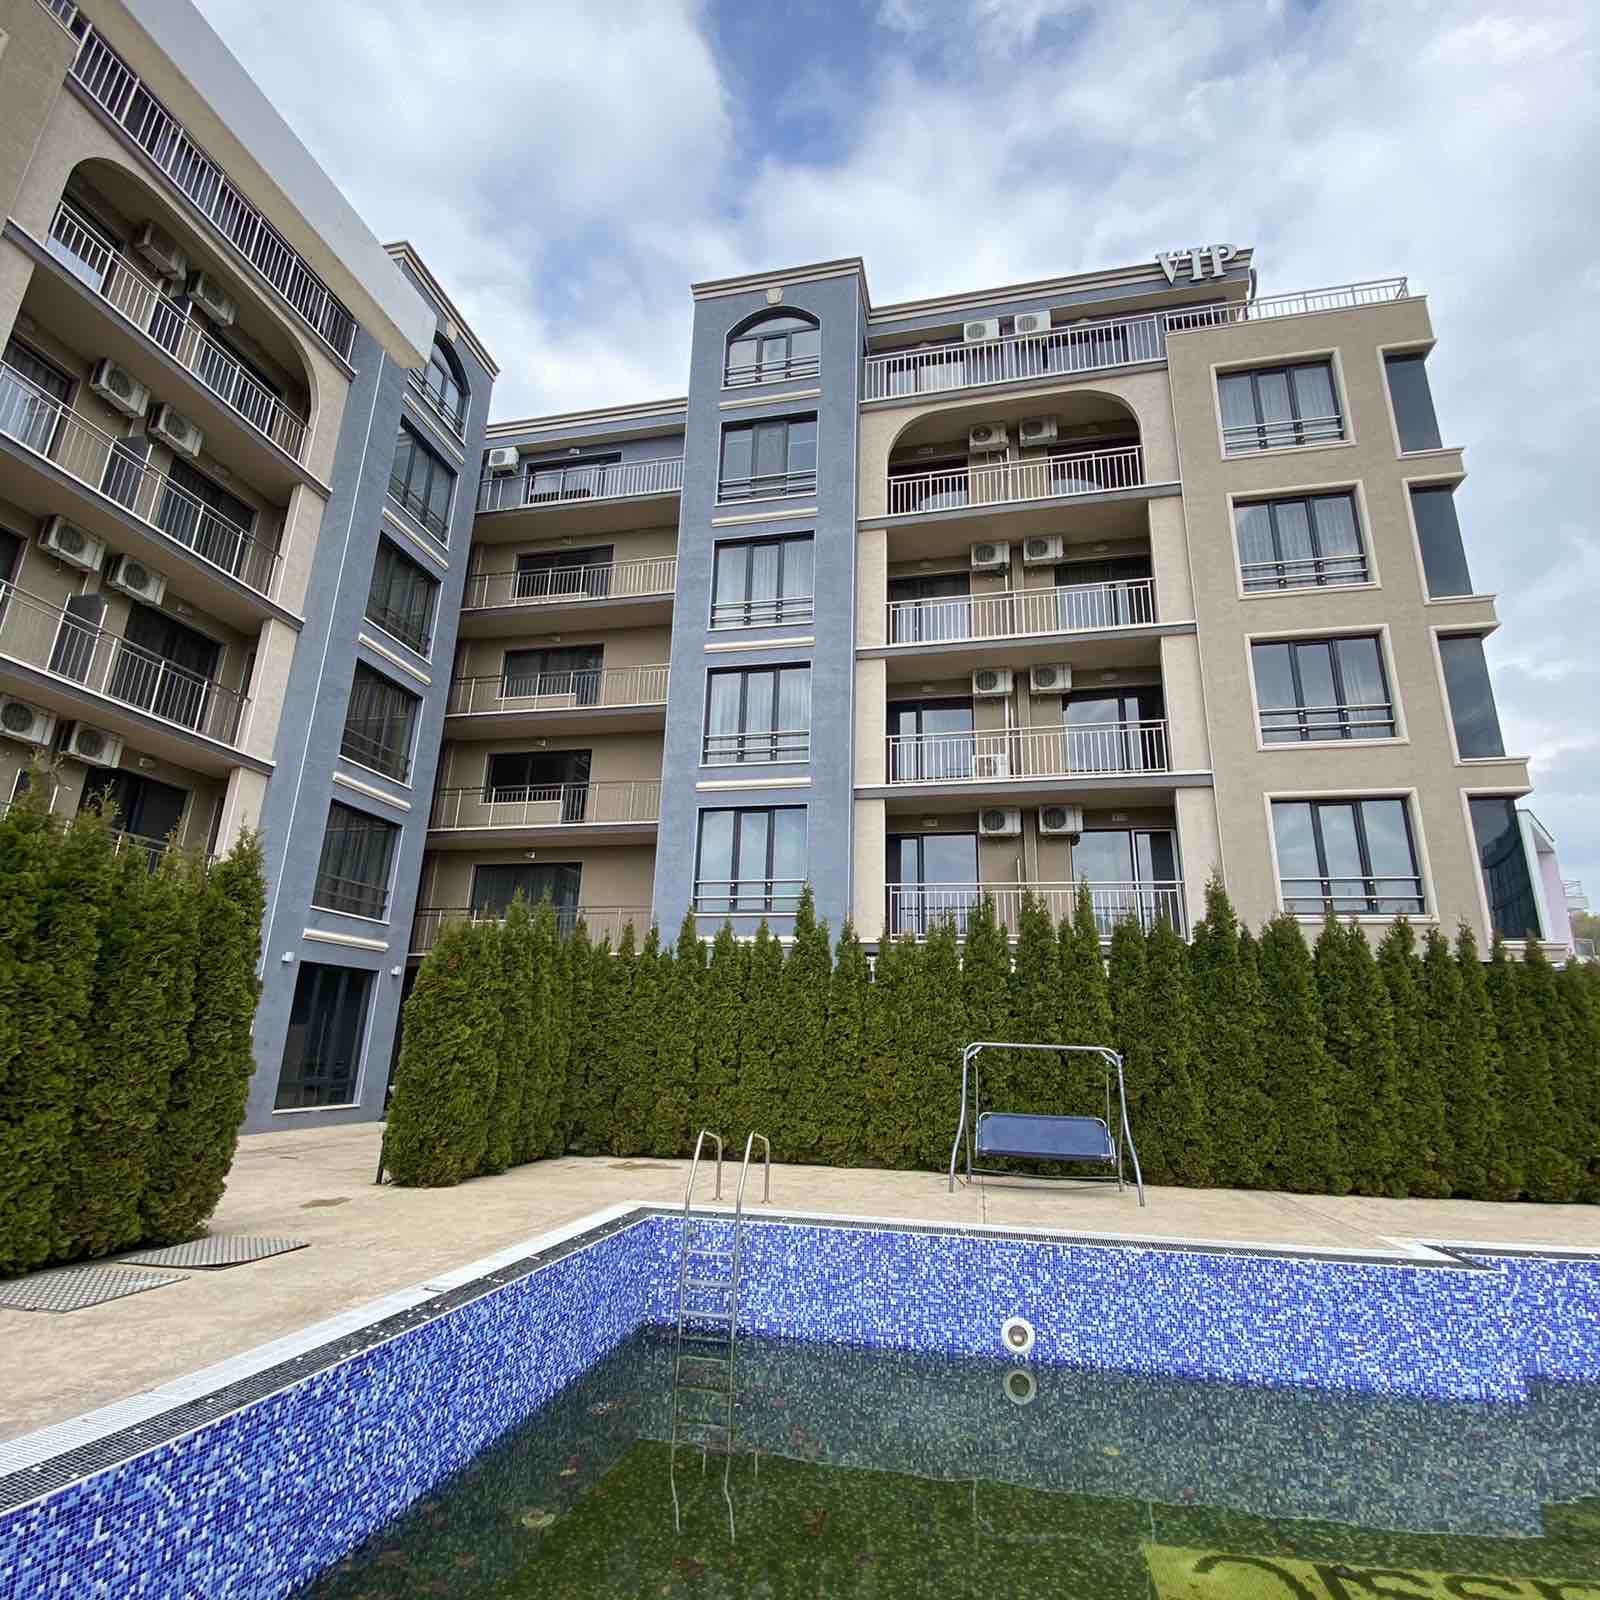 For Sale: Two-bedroom apartment just 300 meters from the beach in Sunny Beach